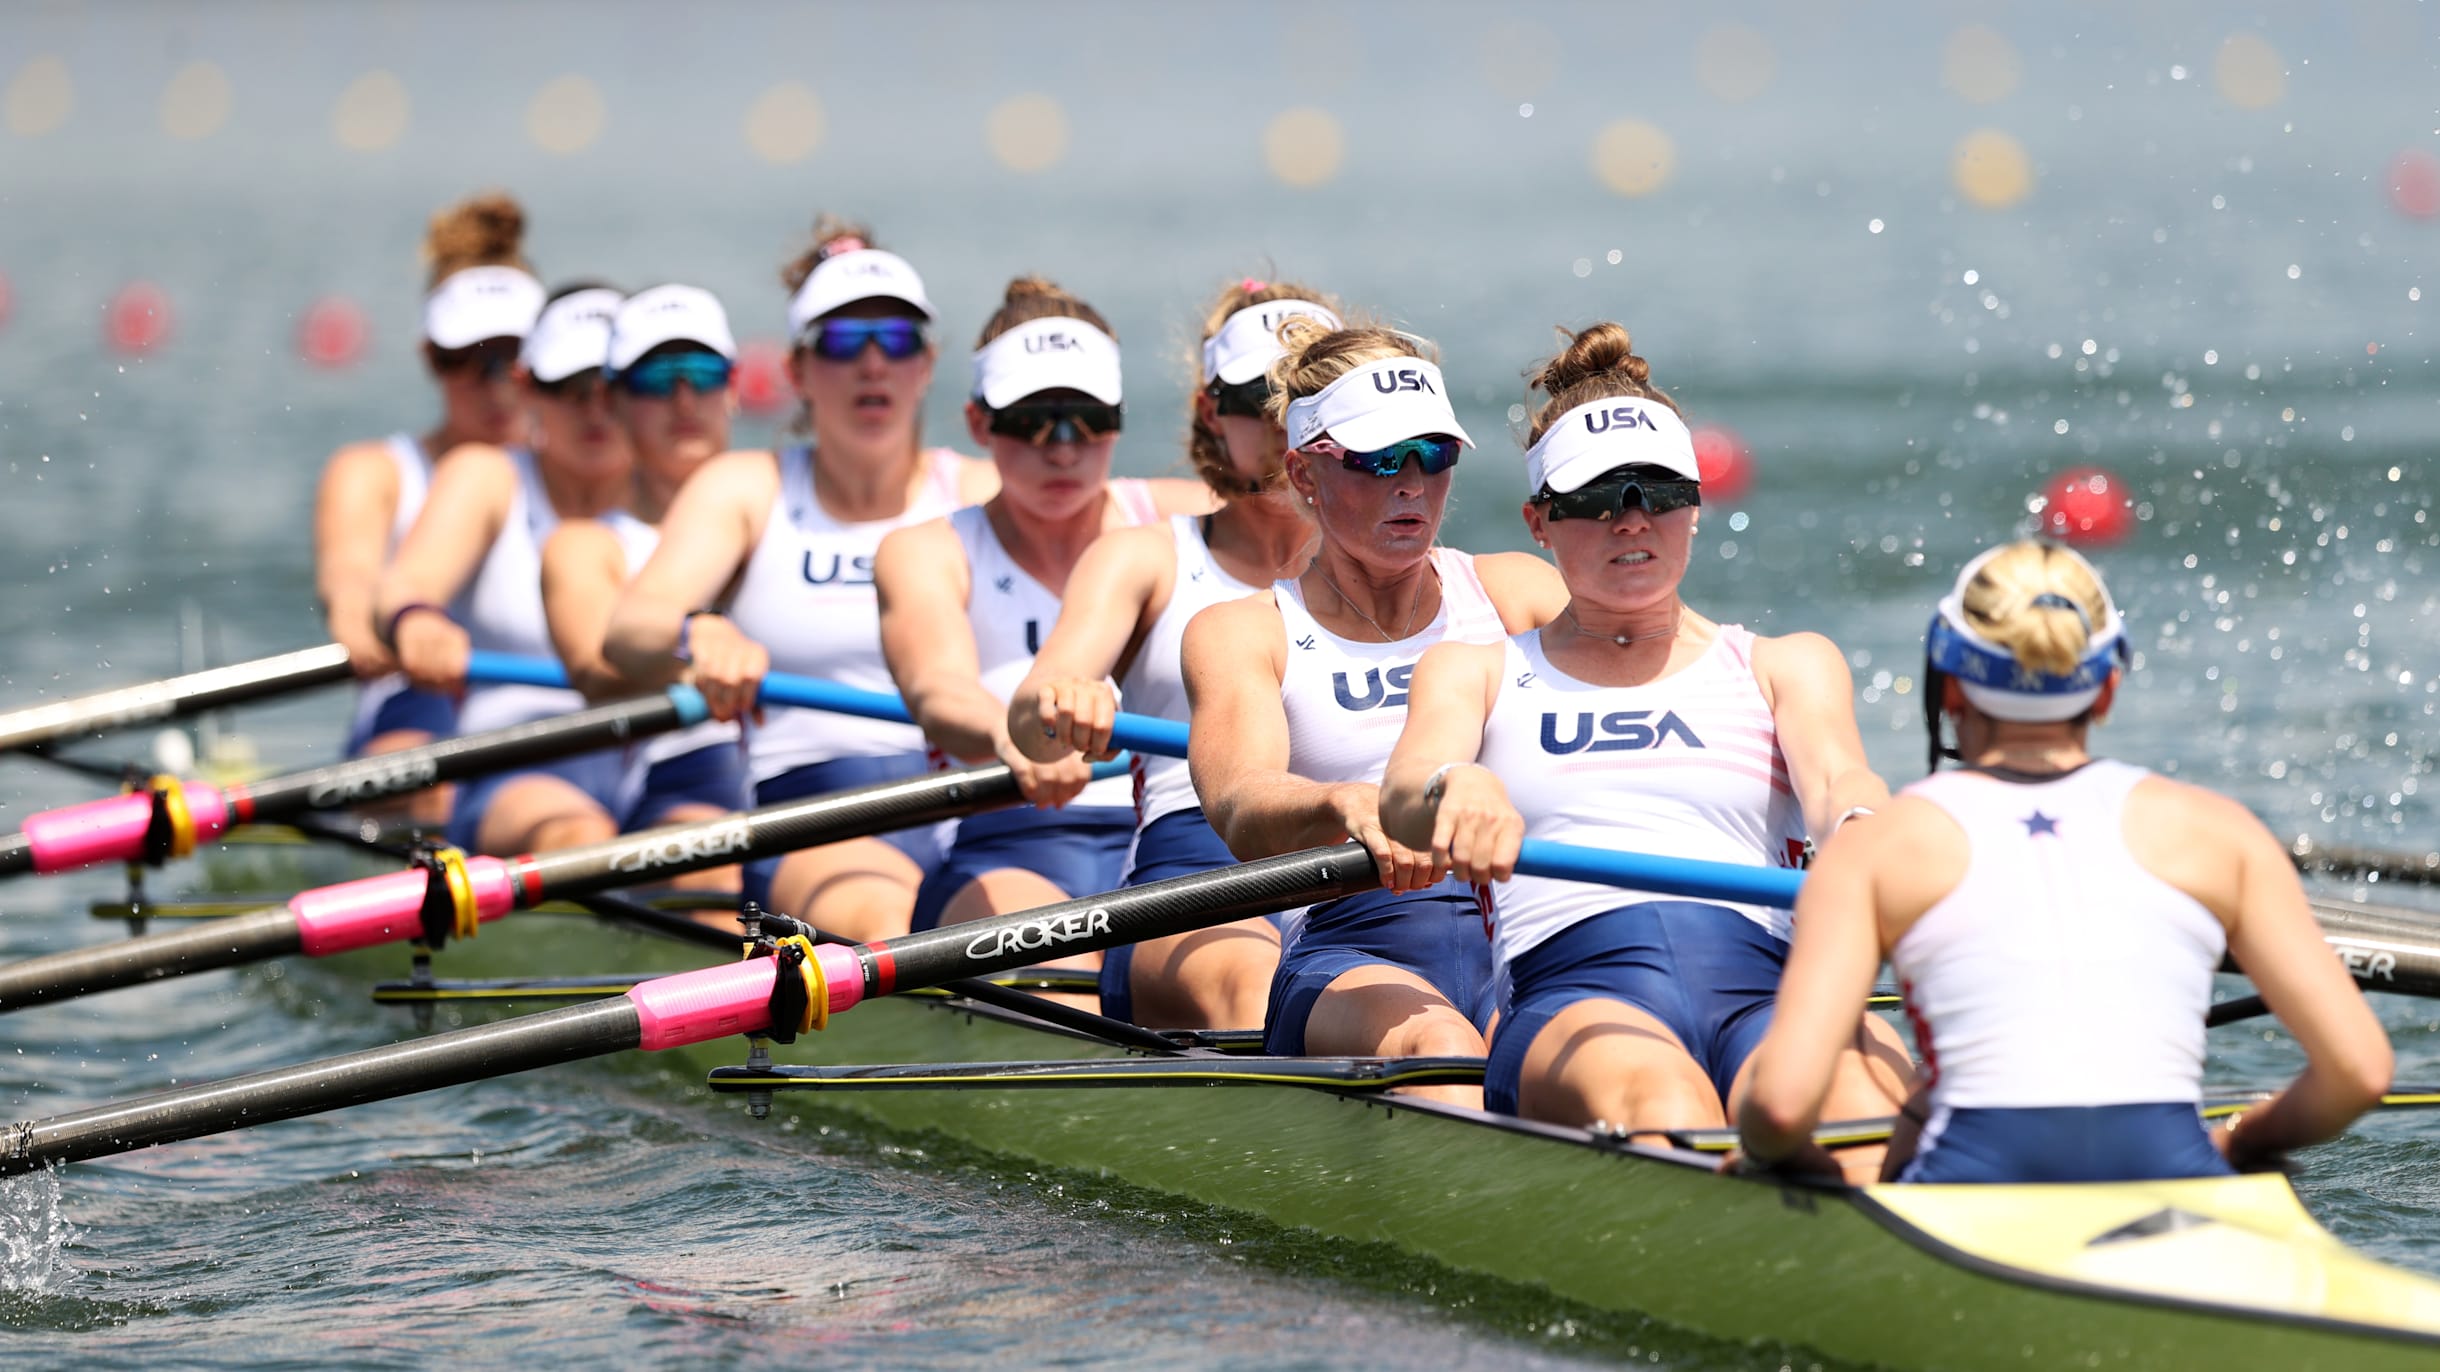 2023 Rowing World Championships Meet the US women in the boat